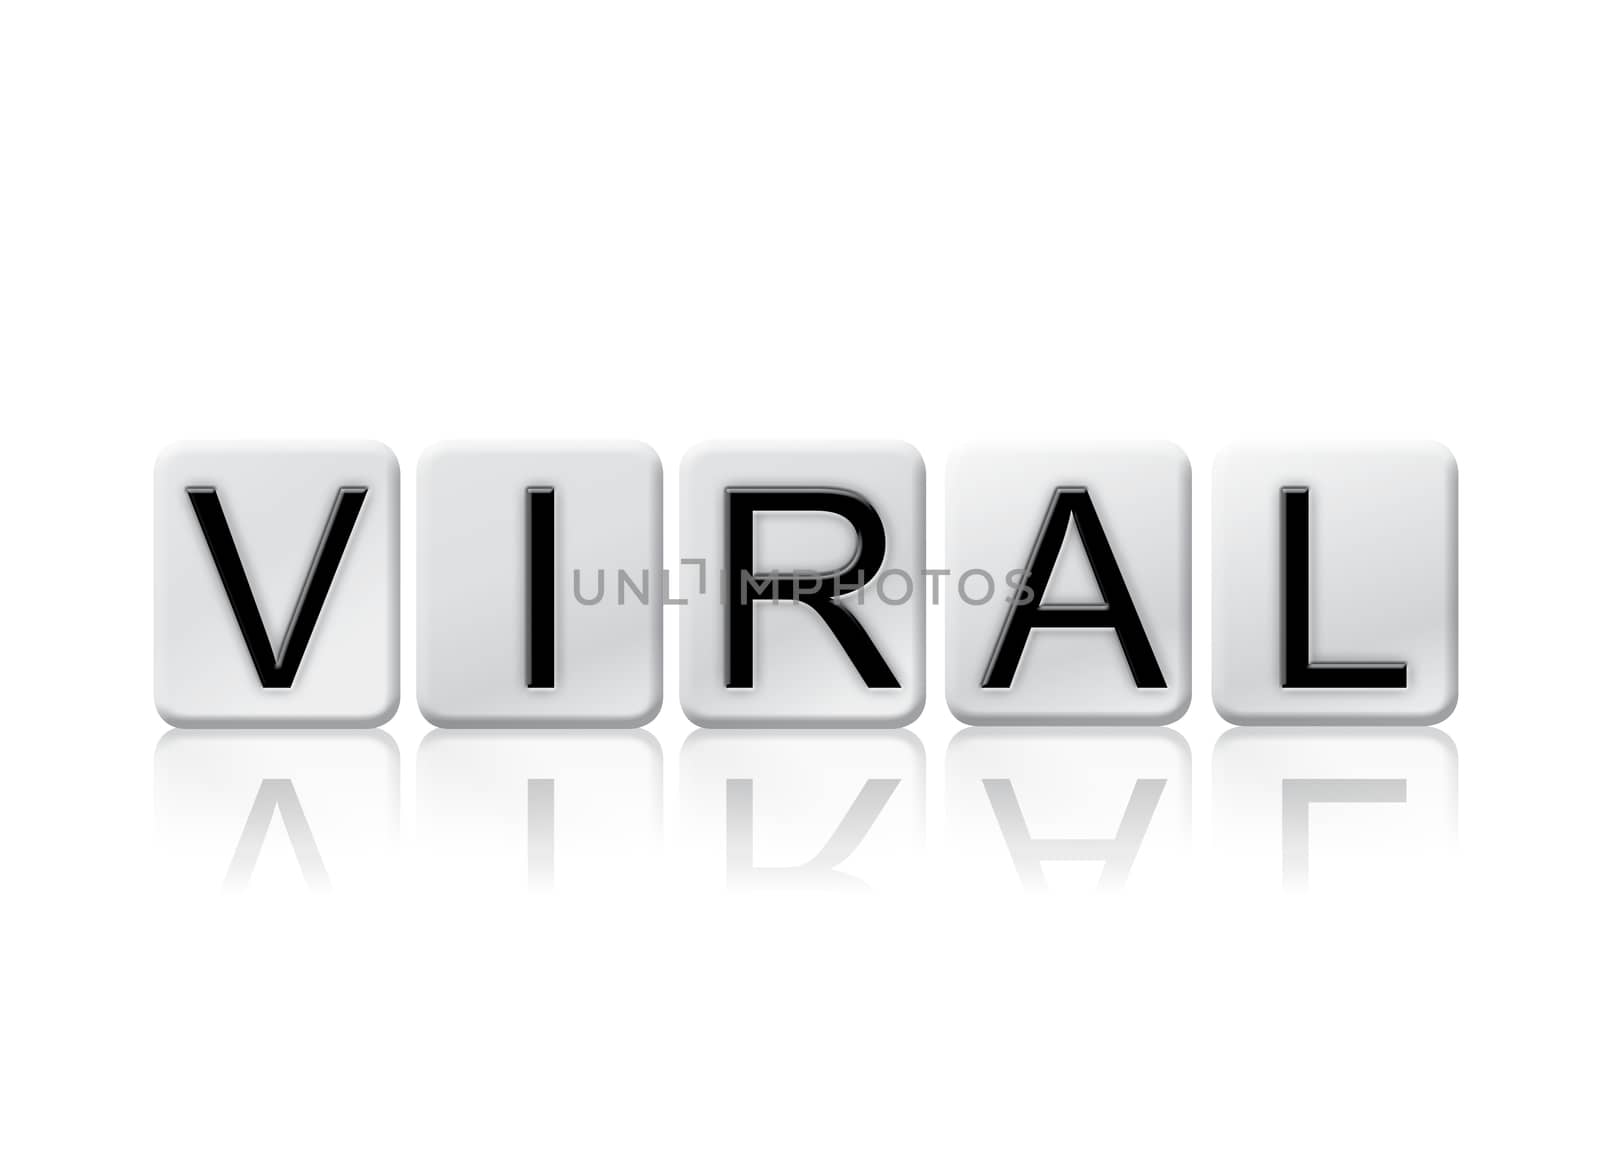 The word "Viral" written in tile letters isolated on a white background.